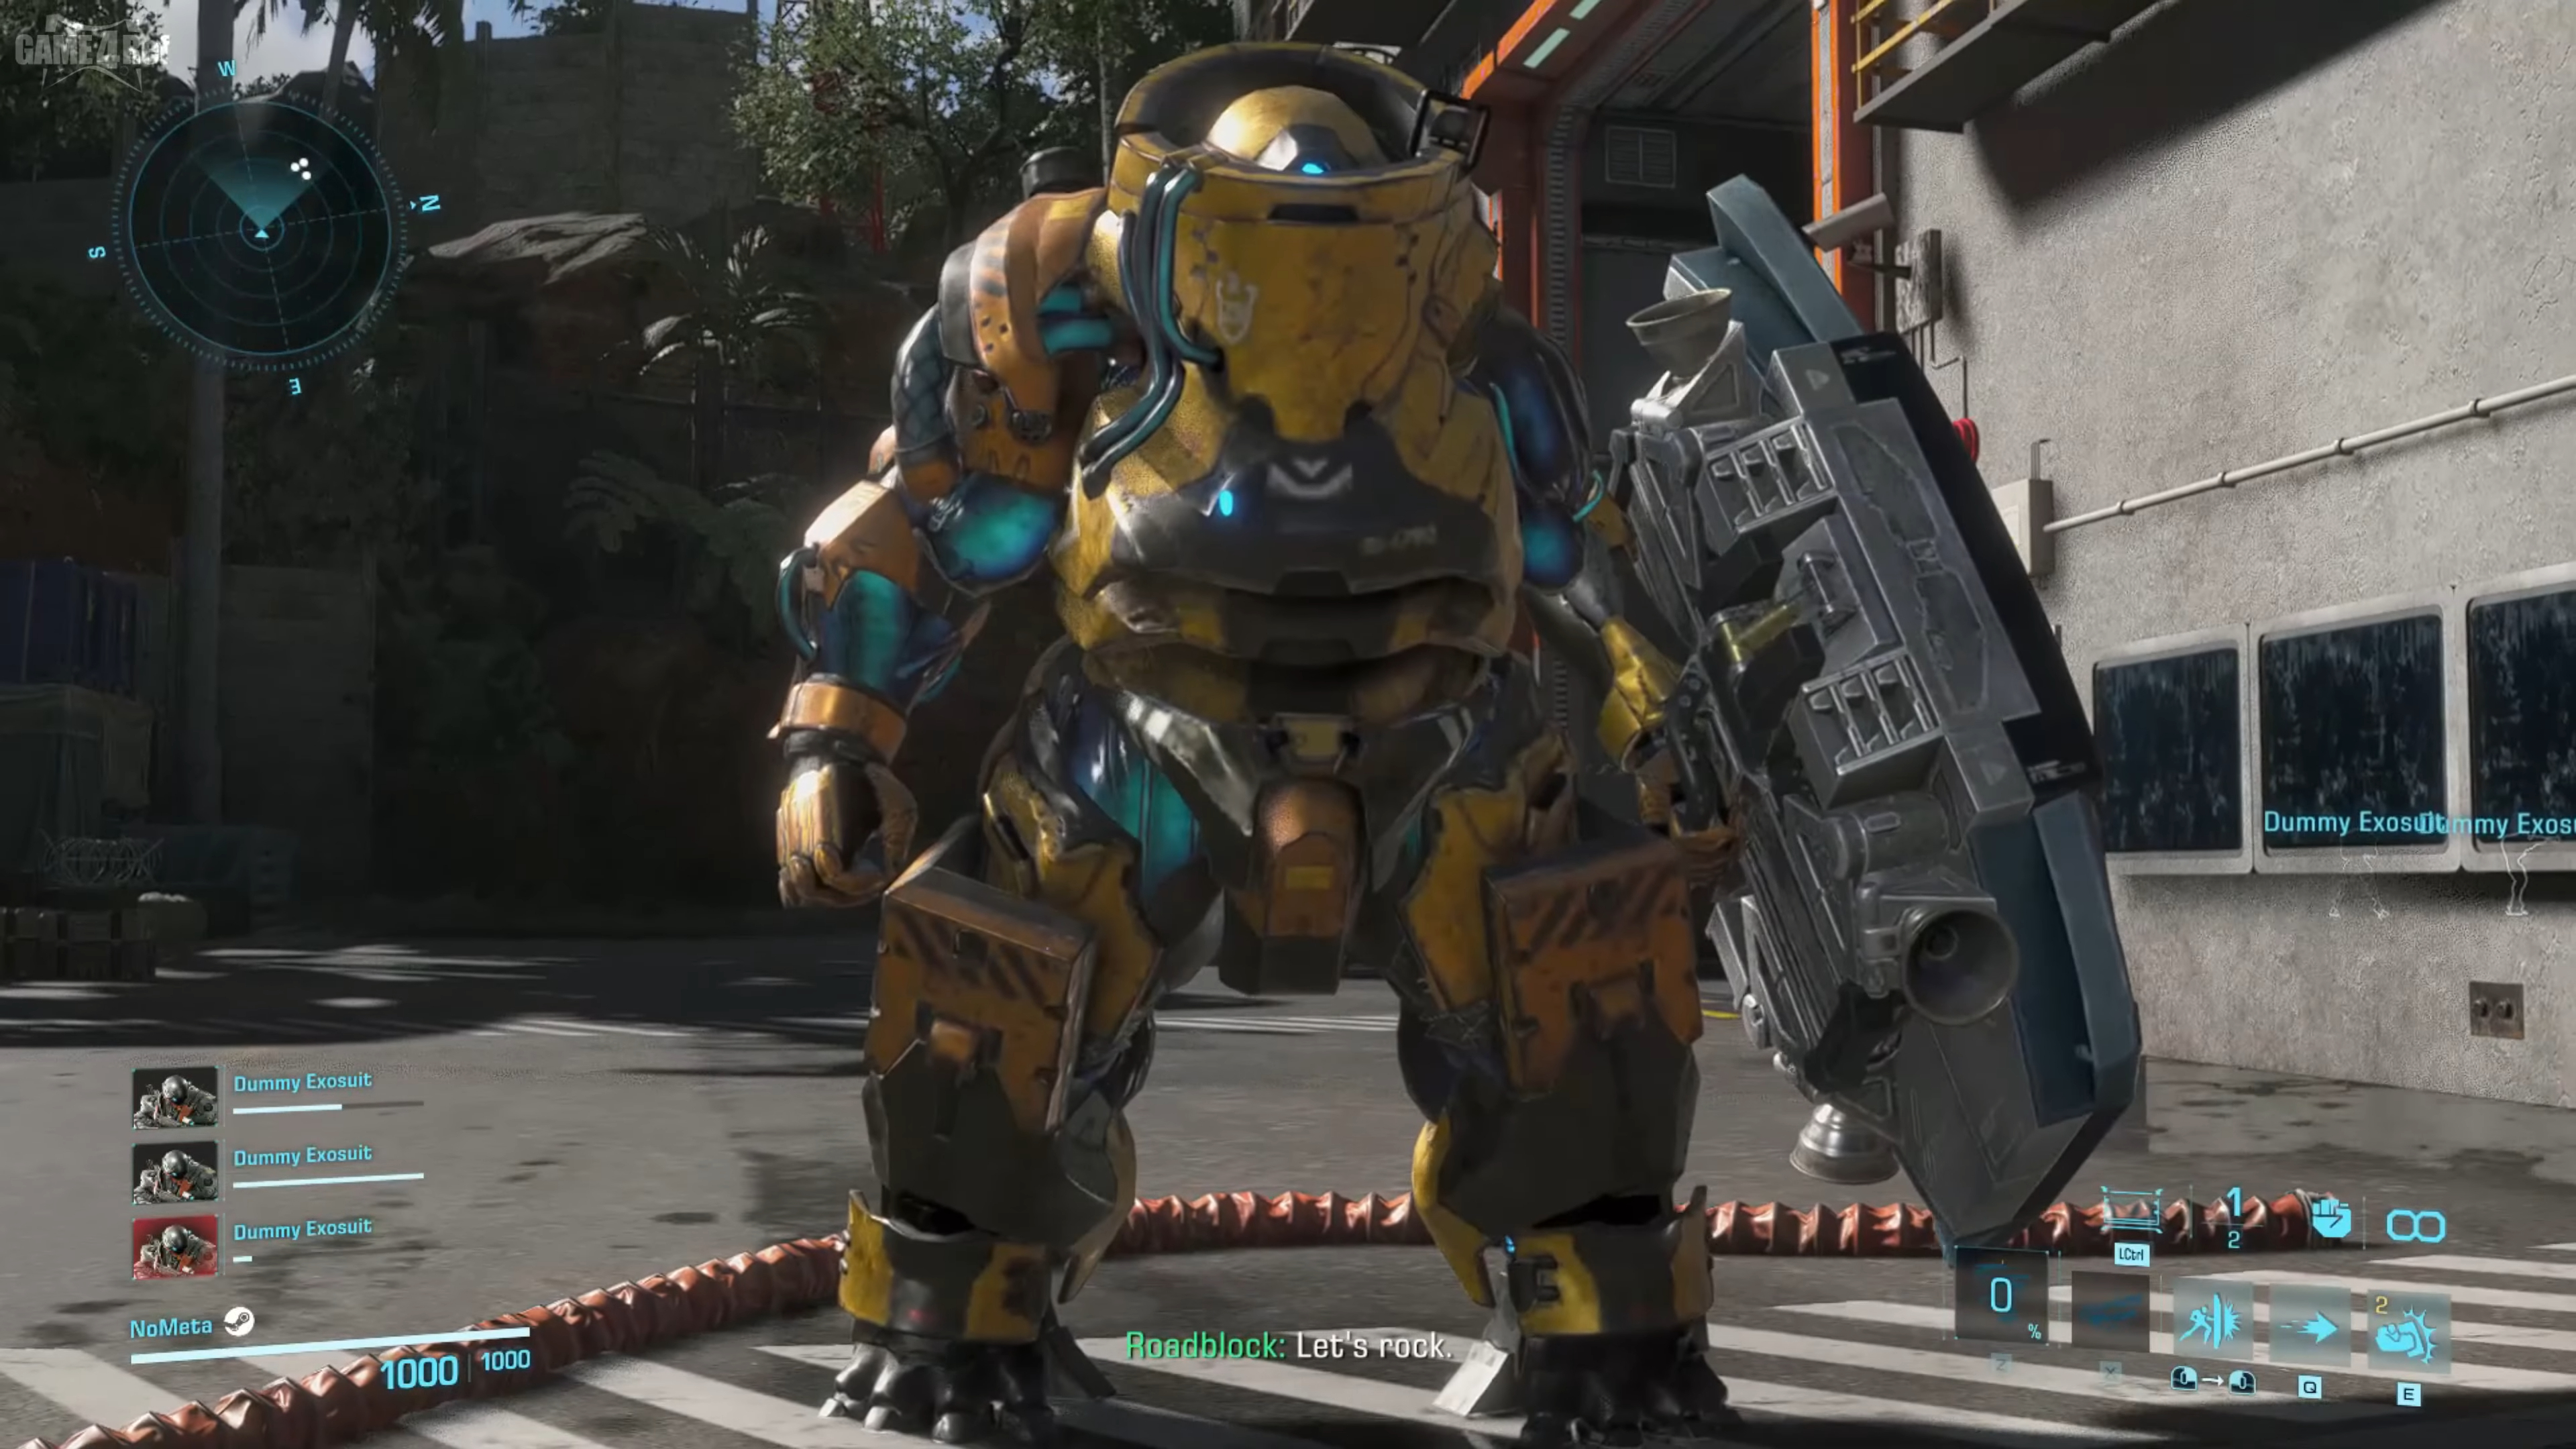 A giant yellow exosuit with a shield.